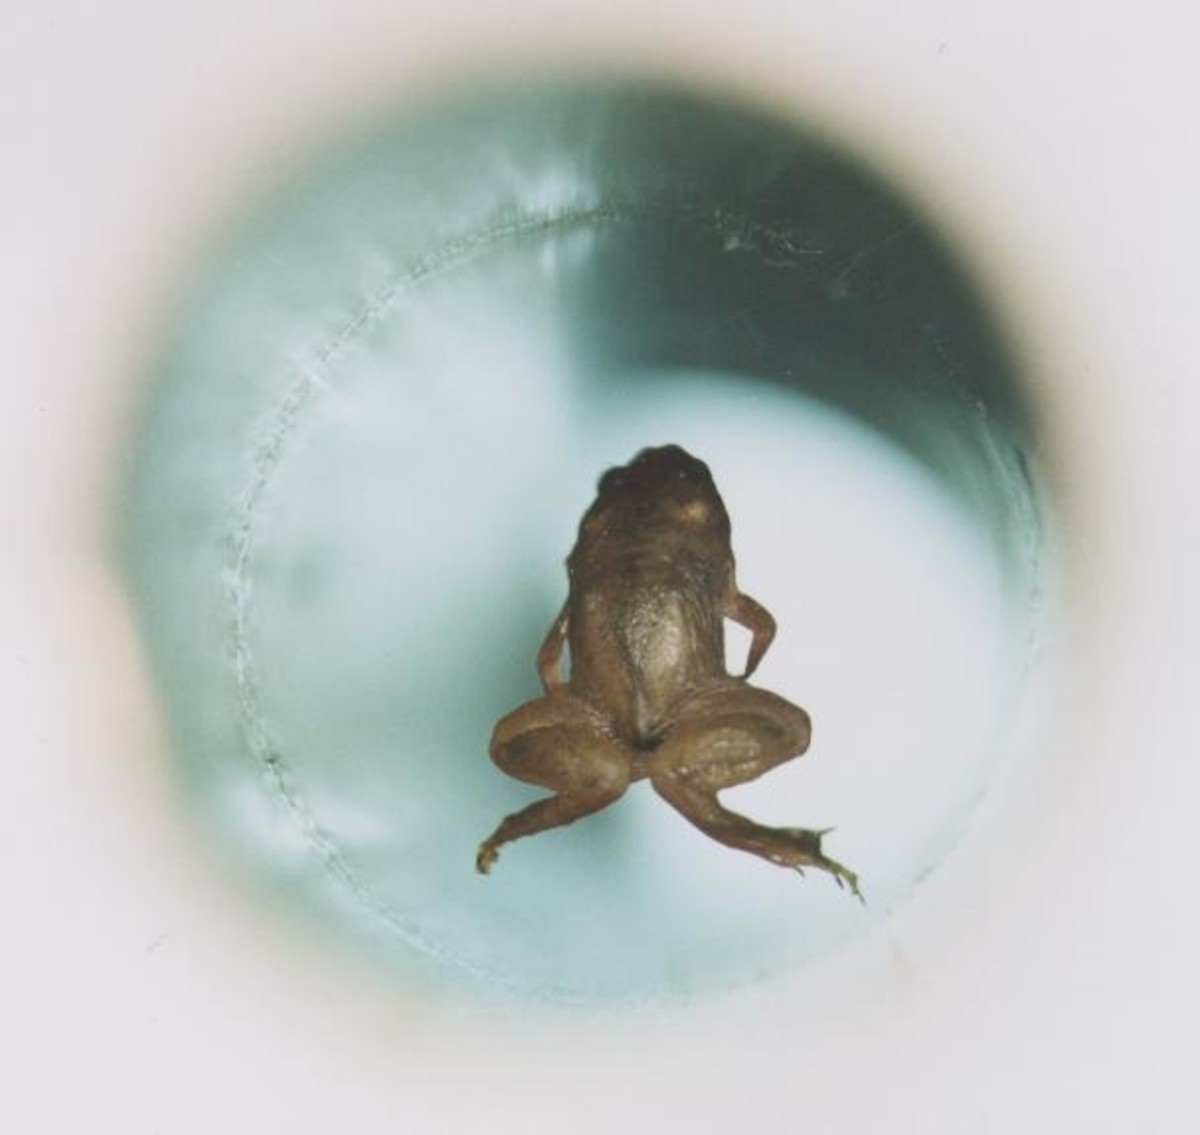 Magnetically levitating a live frog, an experiment that earned Geim and Michael Berry the 2000 Ig Nobel Prize.